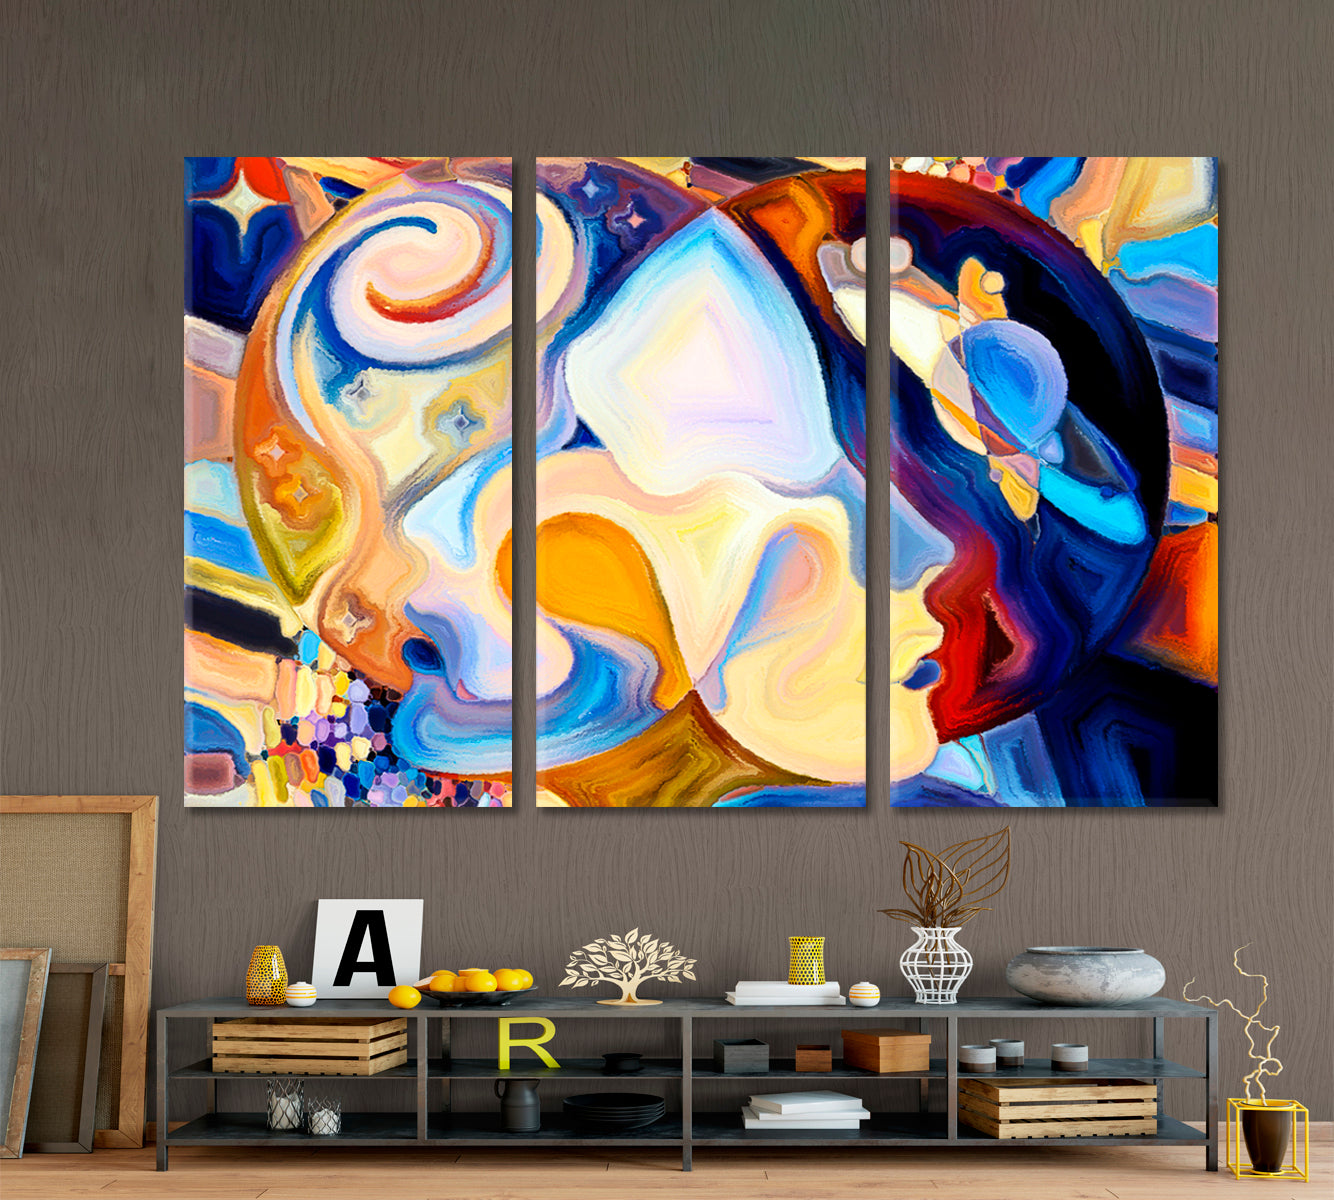 MALE AND FEMALE Abstract Multicolor Shapes Consciousness Art Artesty 3 panels 36" x 24" 